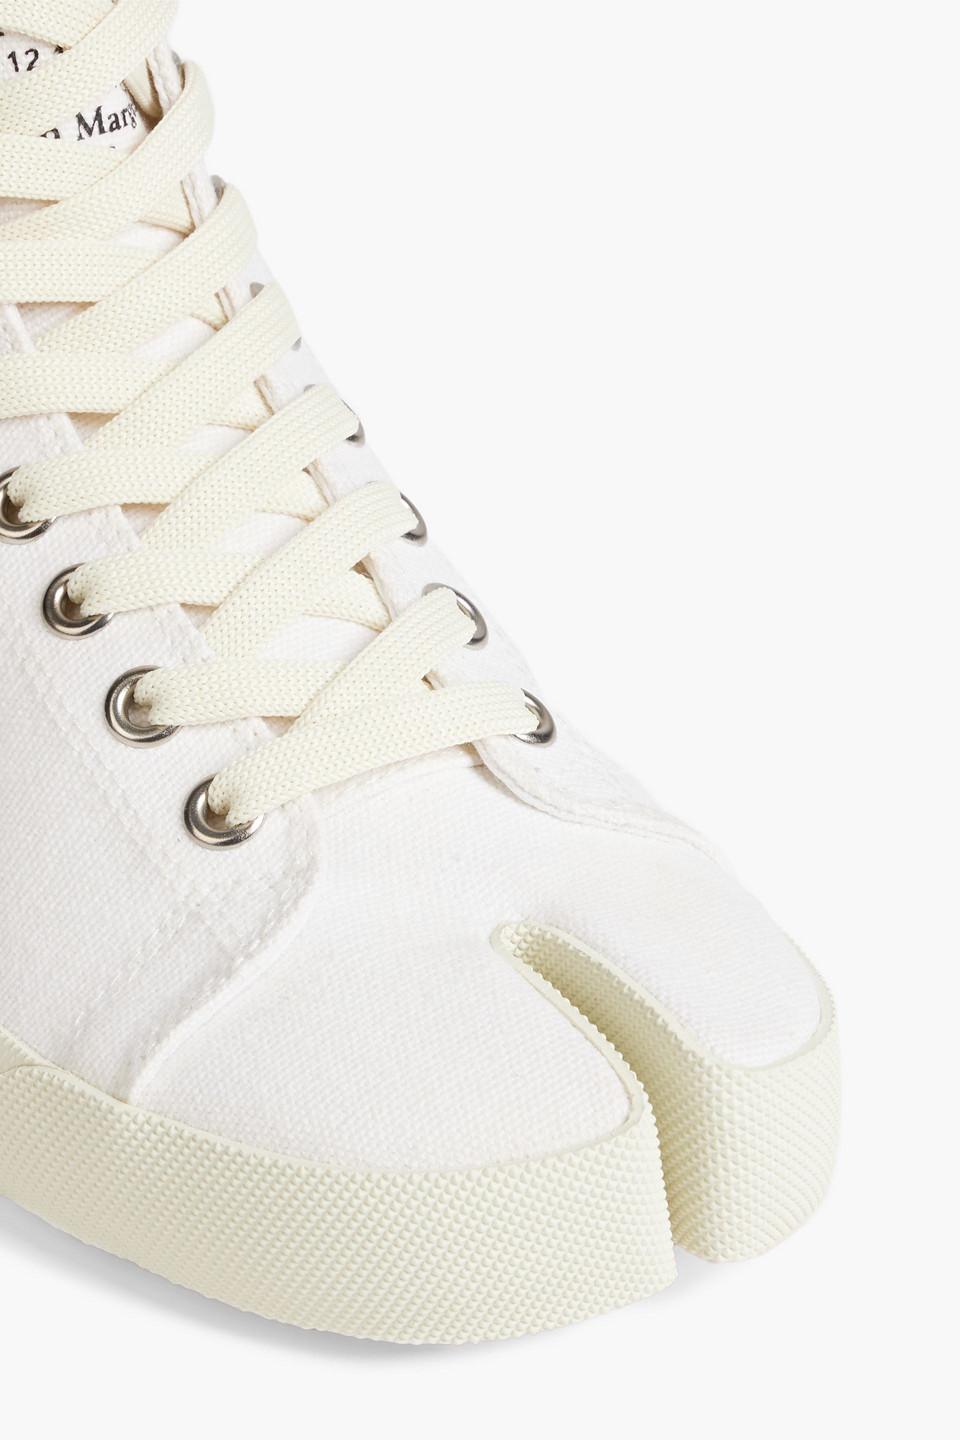 Mais Margiela Tabi Canvas Shoes Unisex Split Toe Lace Up Most Comfortable  Sneakers With Graffiti Upper In Black, White, And Brown From Myeezys,  $45.62 | DHgate.Com